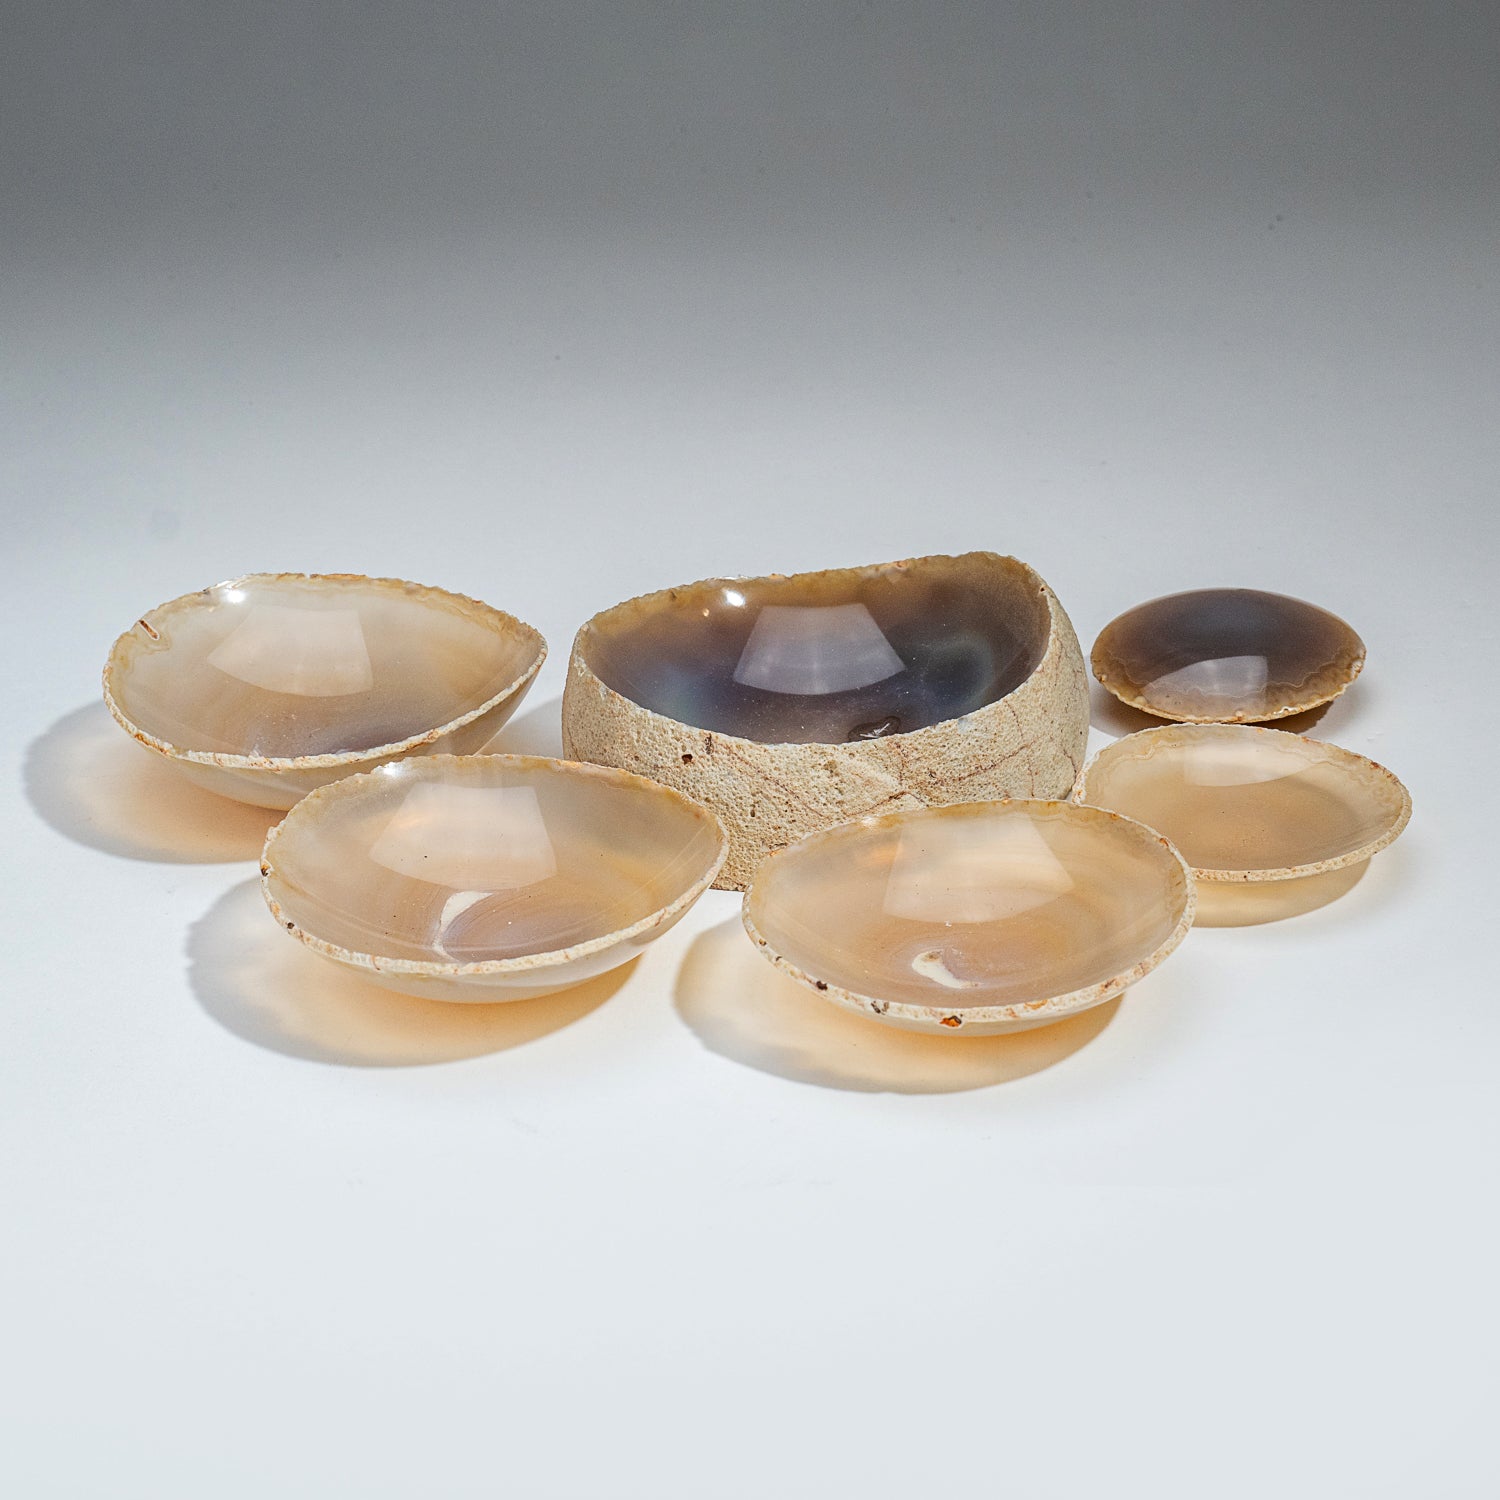 Genuine Set of Five Banded Agate Nesting Dishes (2.1 lbs)